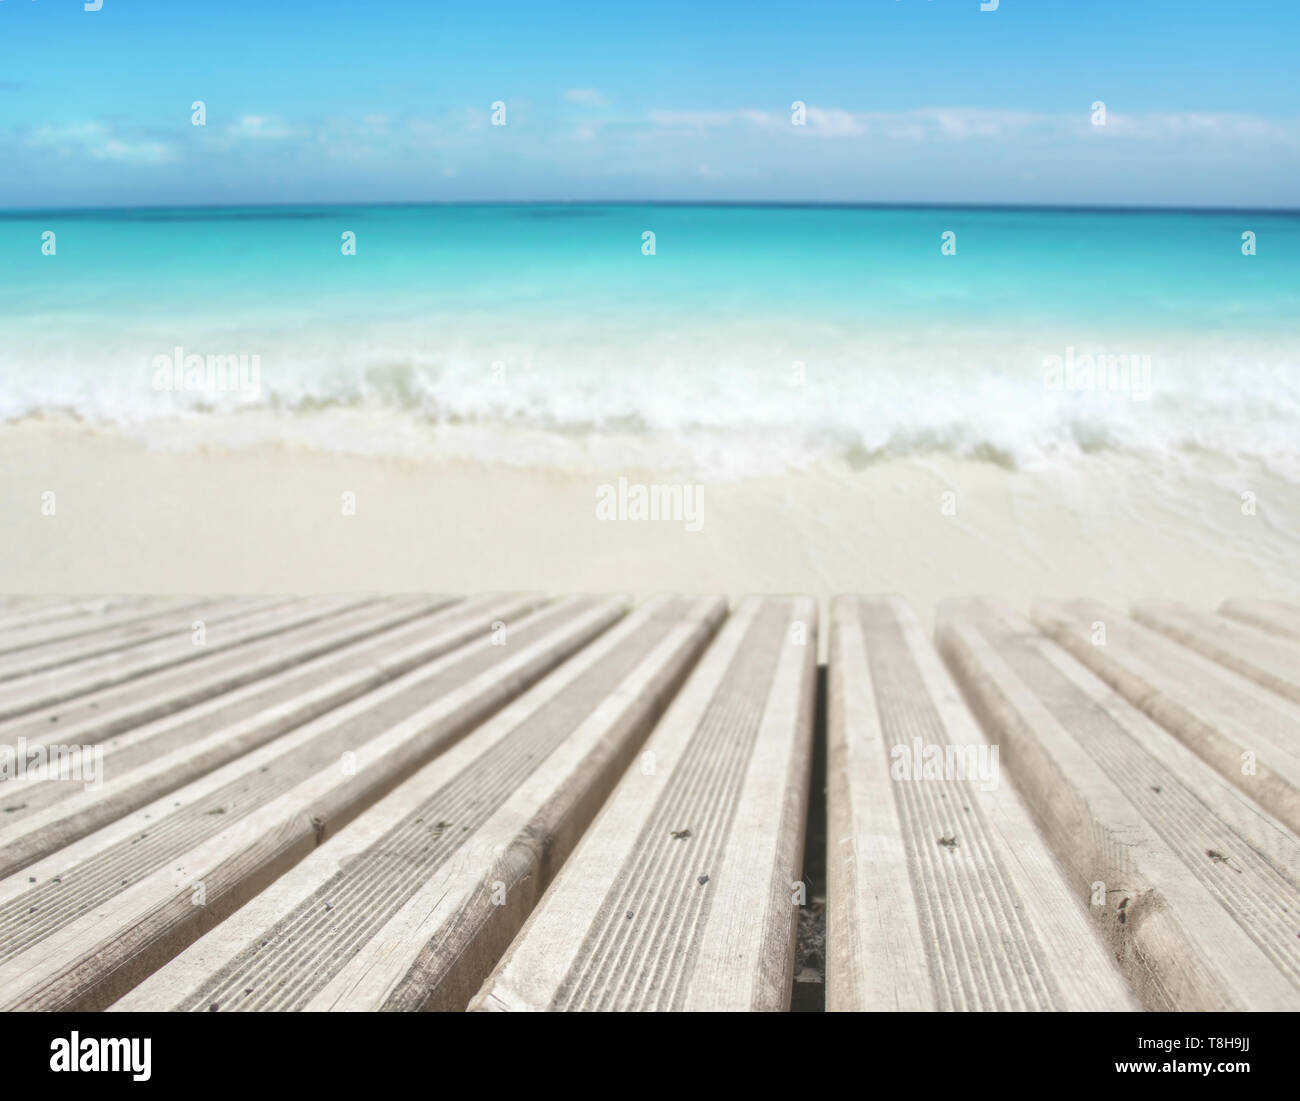 Wooden planks decking on the beach blurred background. Tropical island paradise. Sandy shore washing by the wave. Bright turquoise ocean water.  Dream Stock Photo